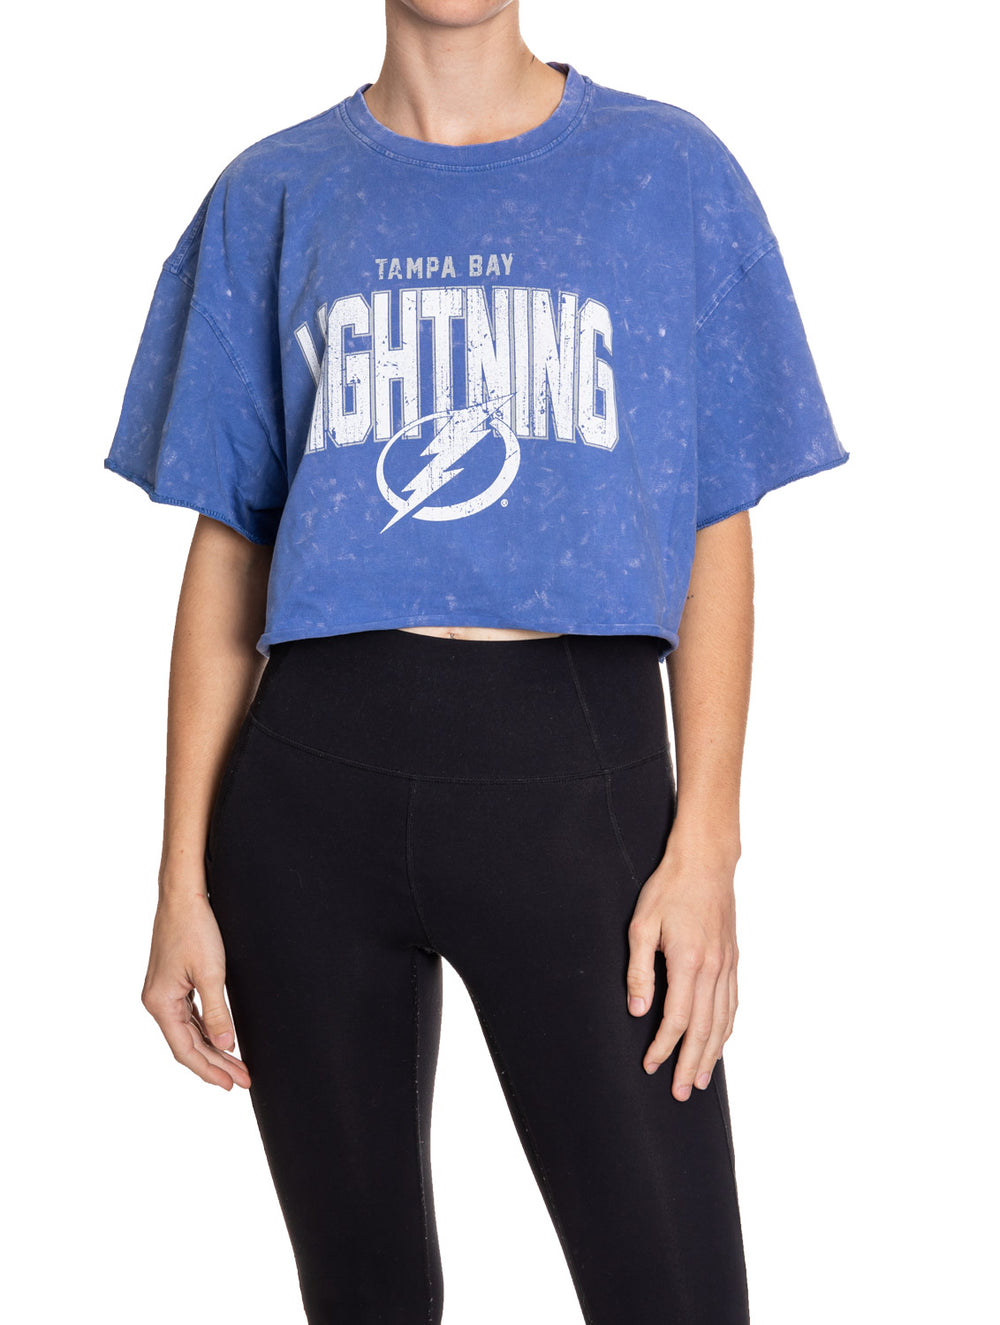 Woman standing in front of a white background wearing an oversized, blue, acid wash crop top - featuring a Tampa Bay Lightning logo in the center of the shirt.